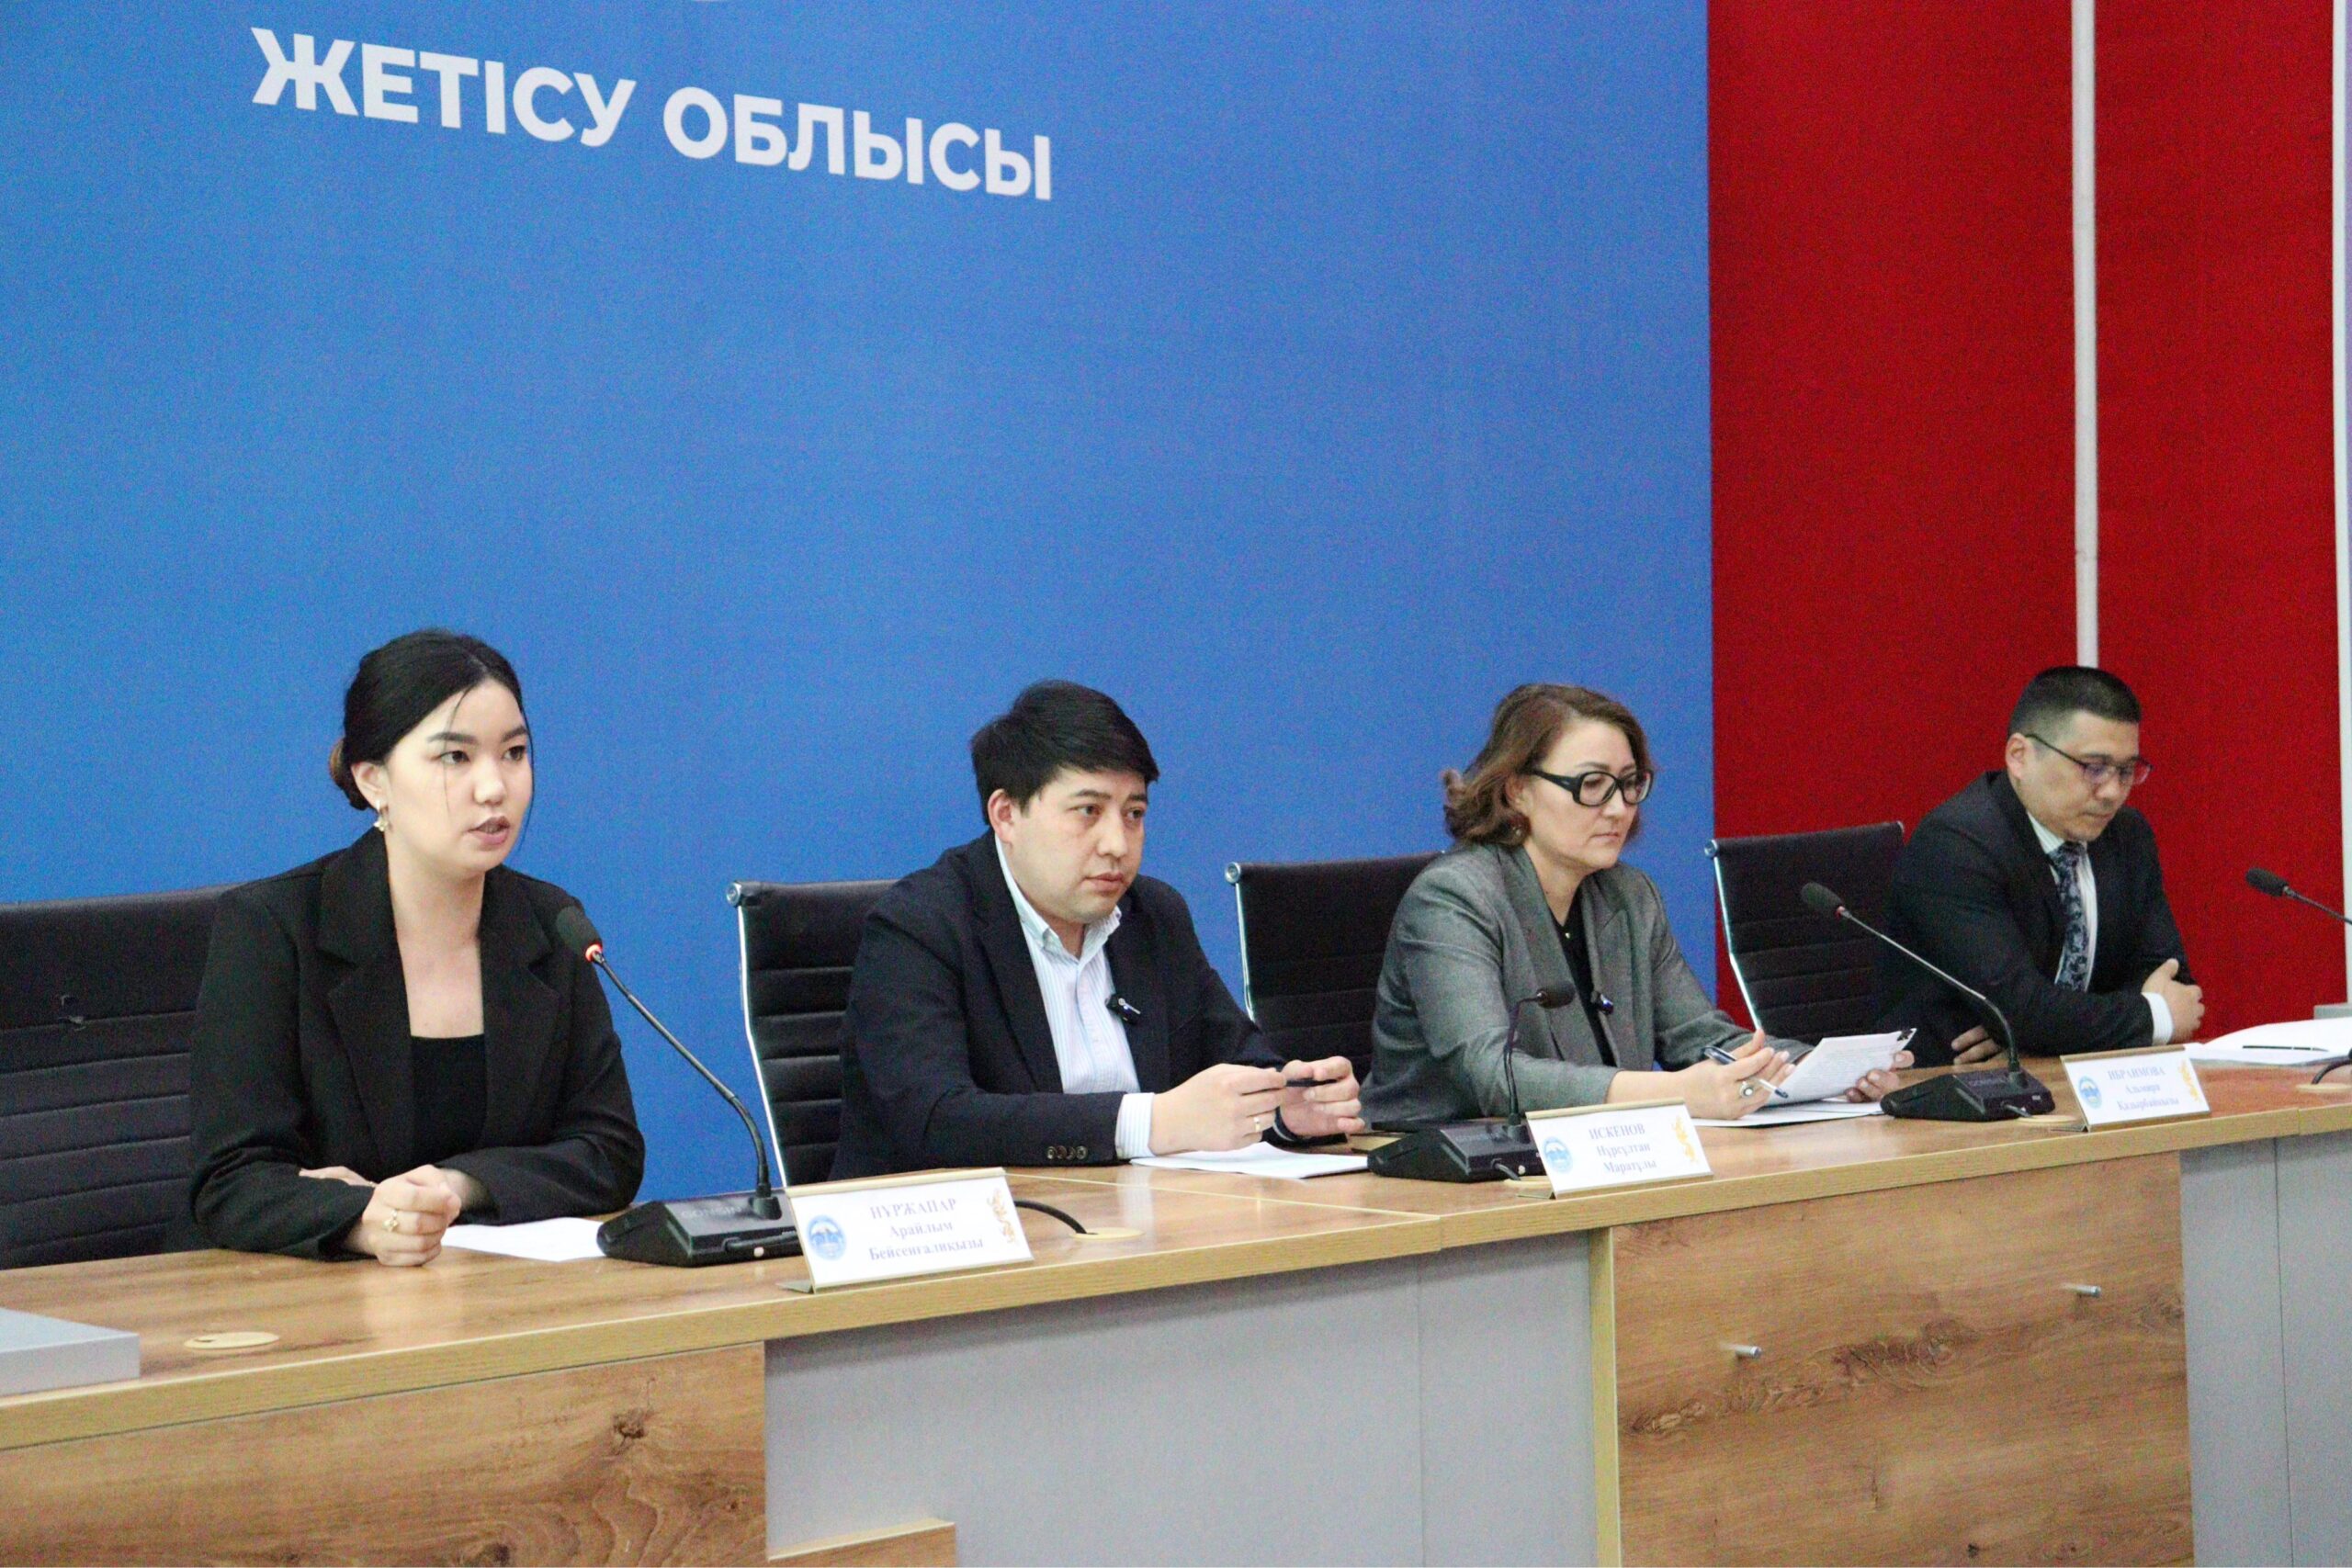 SEC “Zhetisu” presented the results of its activities